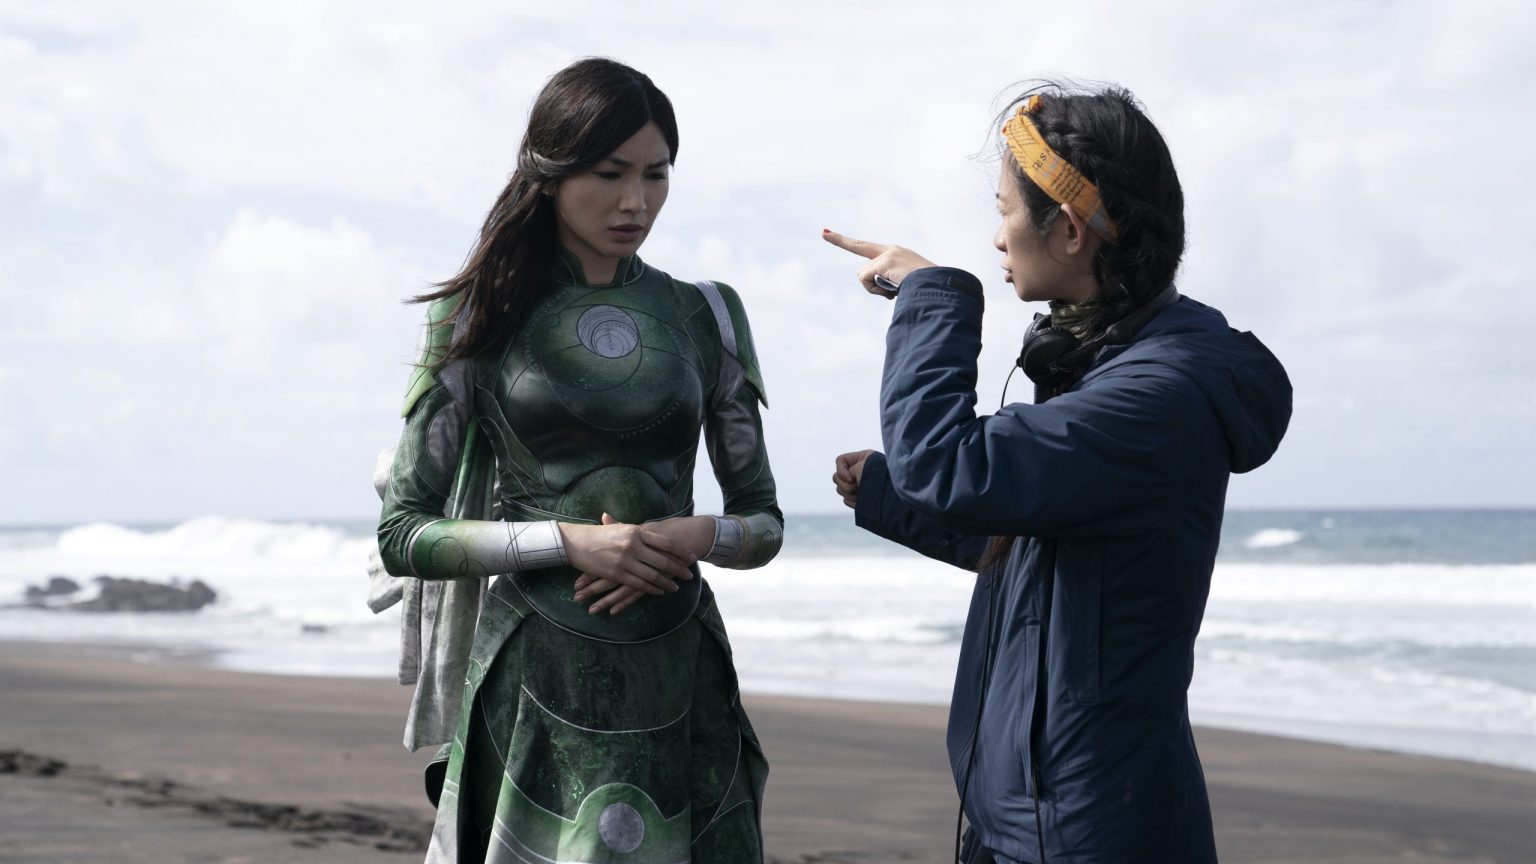 Oscar-winning director Chloé Zhao gives direction to Gemma Chan in her green costume as Sersi on a vast beach while shooting the new Marvel Studios film ETERNALS.